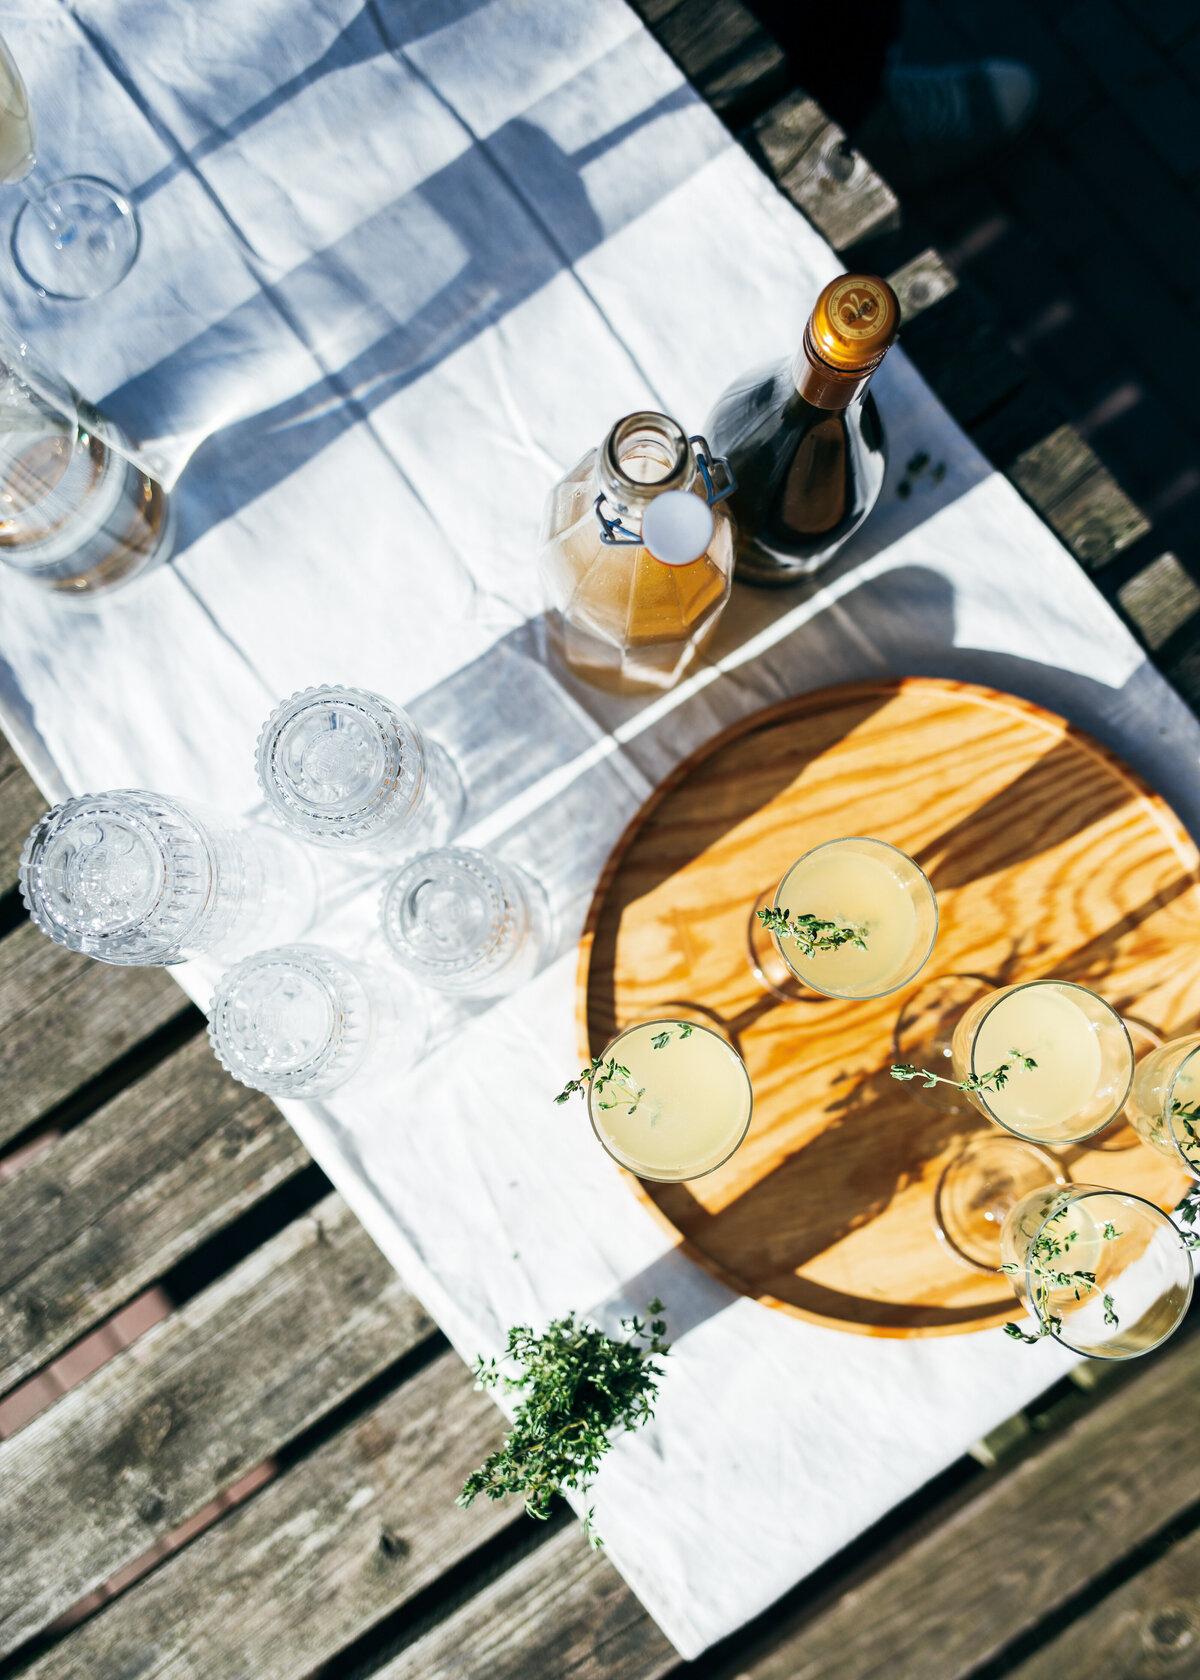 Some cocktails on a wooden tray outside in the sunshine for a garden party or garden wedding.